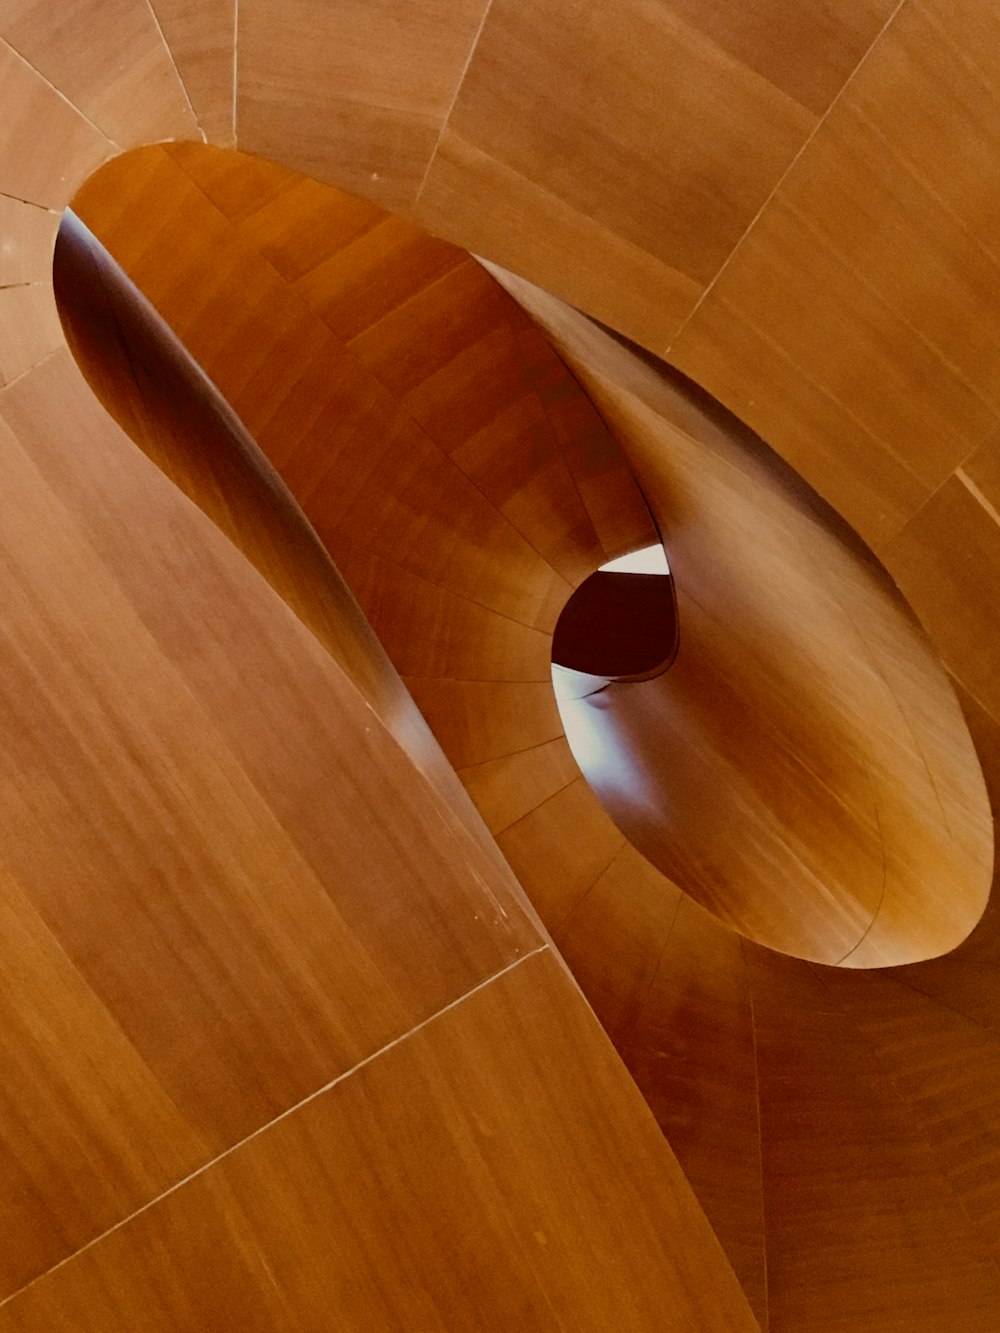 a wooden structure with a circular hole in the center